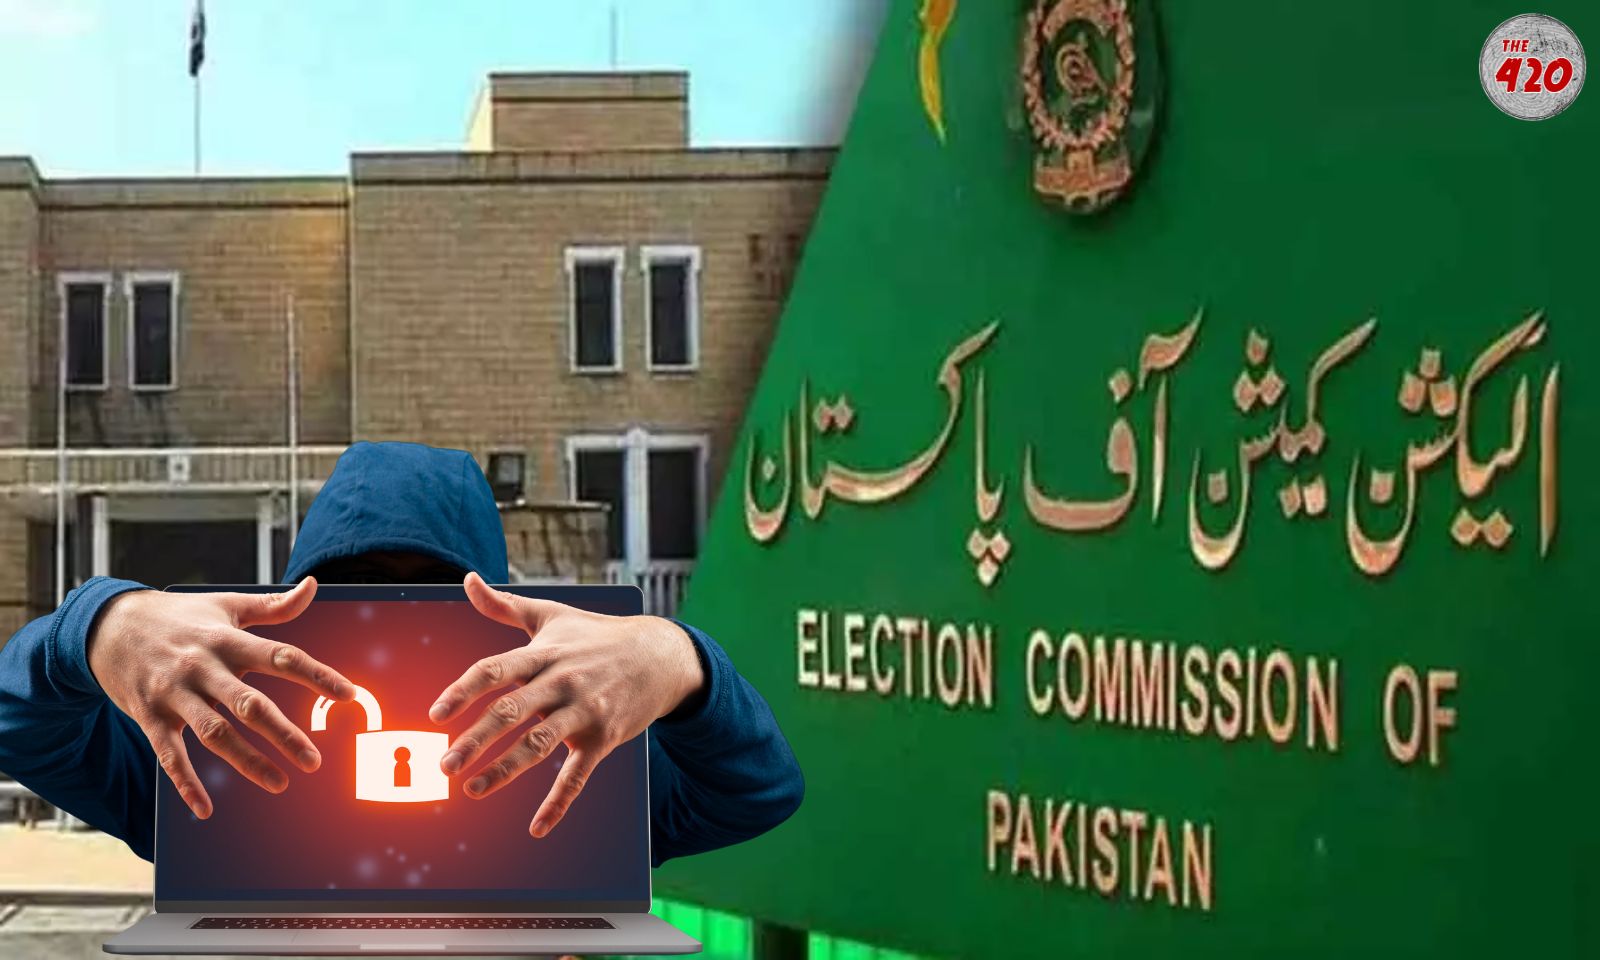 Election Commission of Pakistan on High Alert Potential Cyber Security Breach Detected